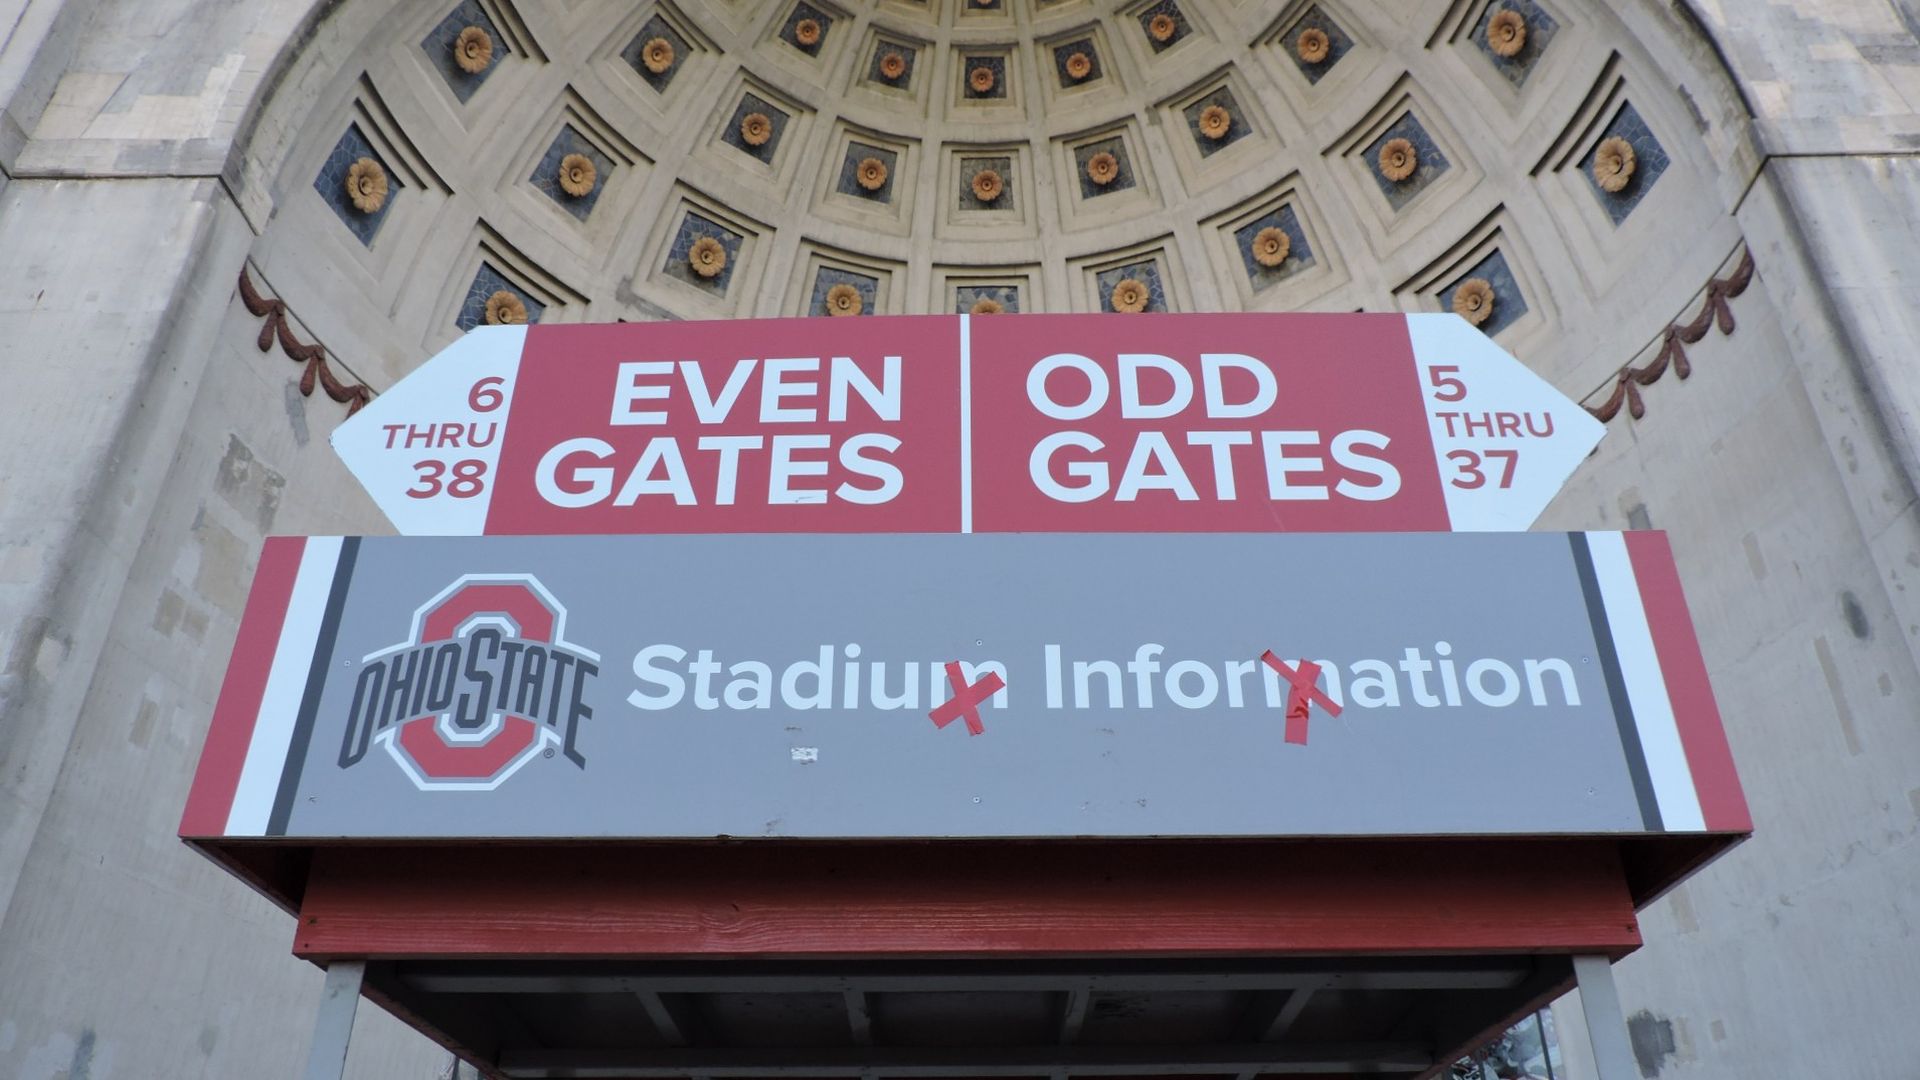 An information booth in front of Ohio Stadium has red tape in the shape of an X over the Ms in "stadium information"